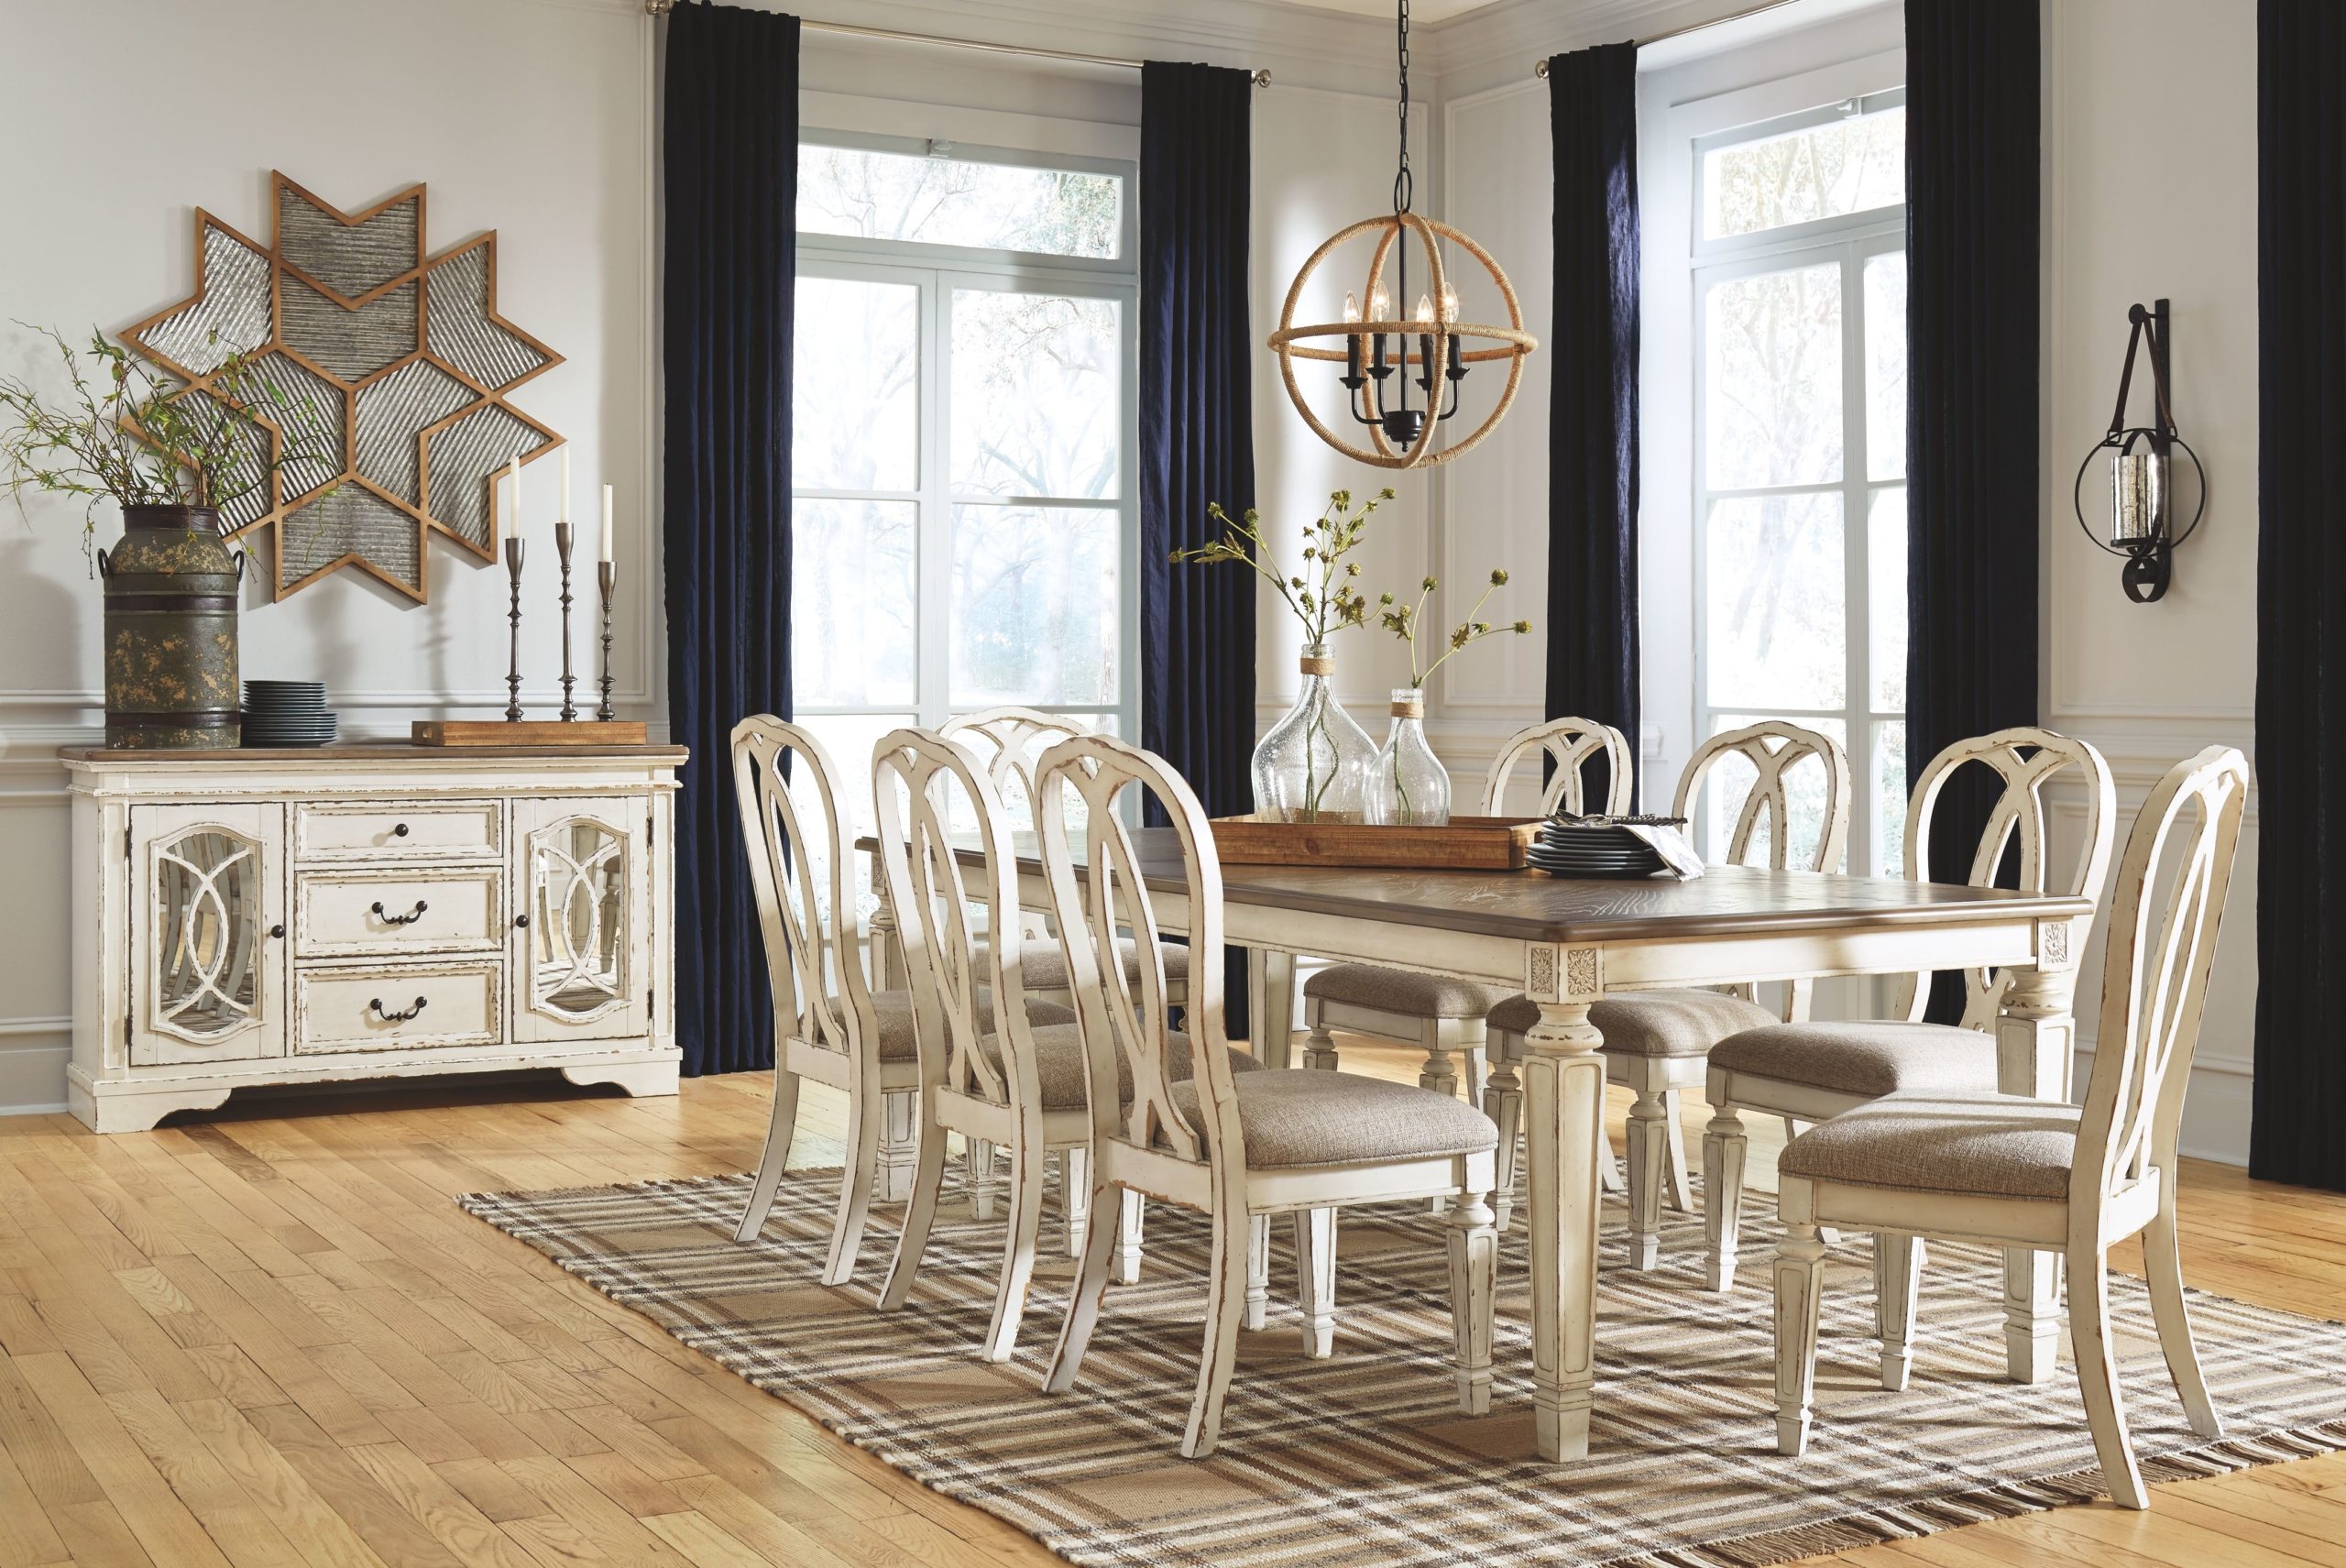 Bloomingdales Dining Room Set With White Chairs